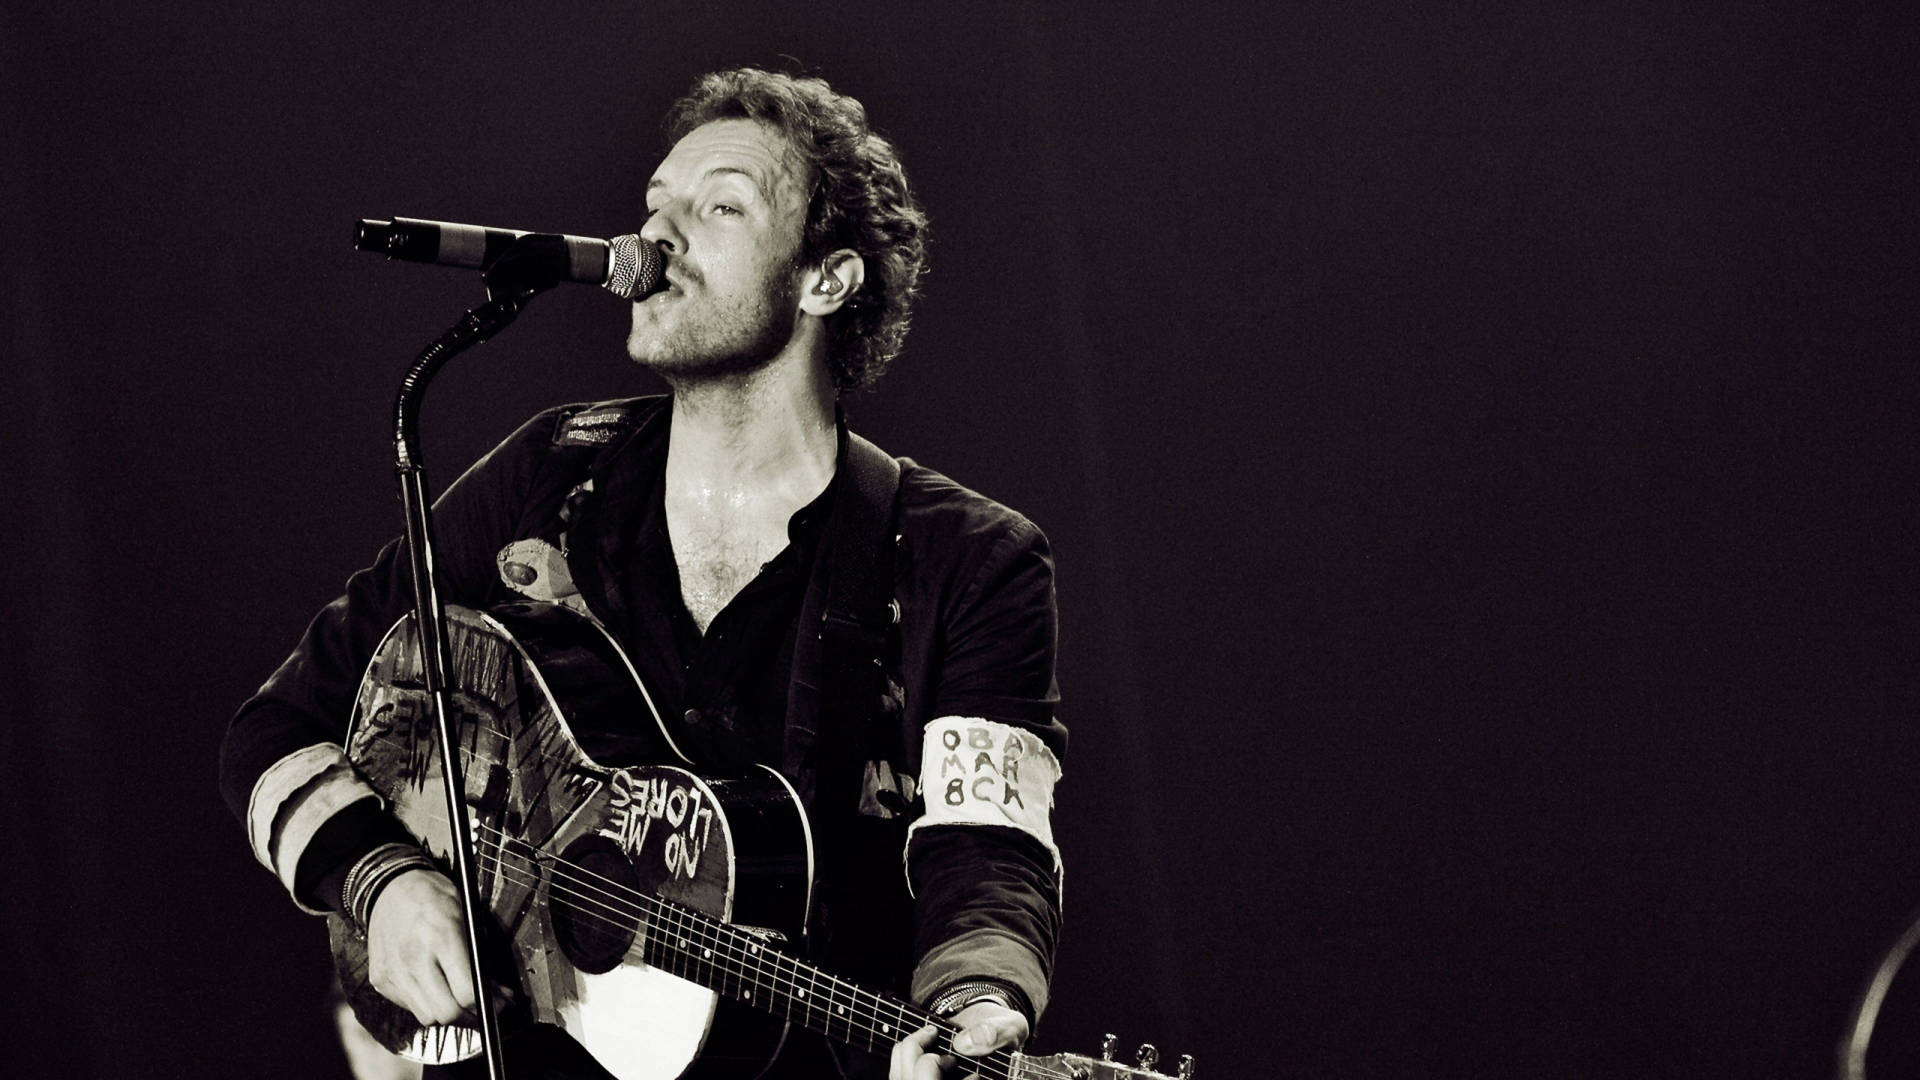 Chris Martin Coldplay Black And White Wallpaper